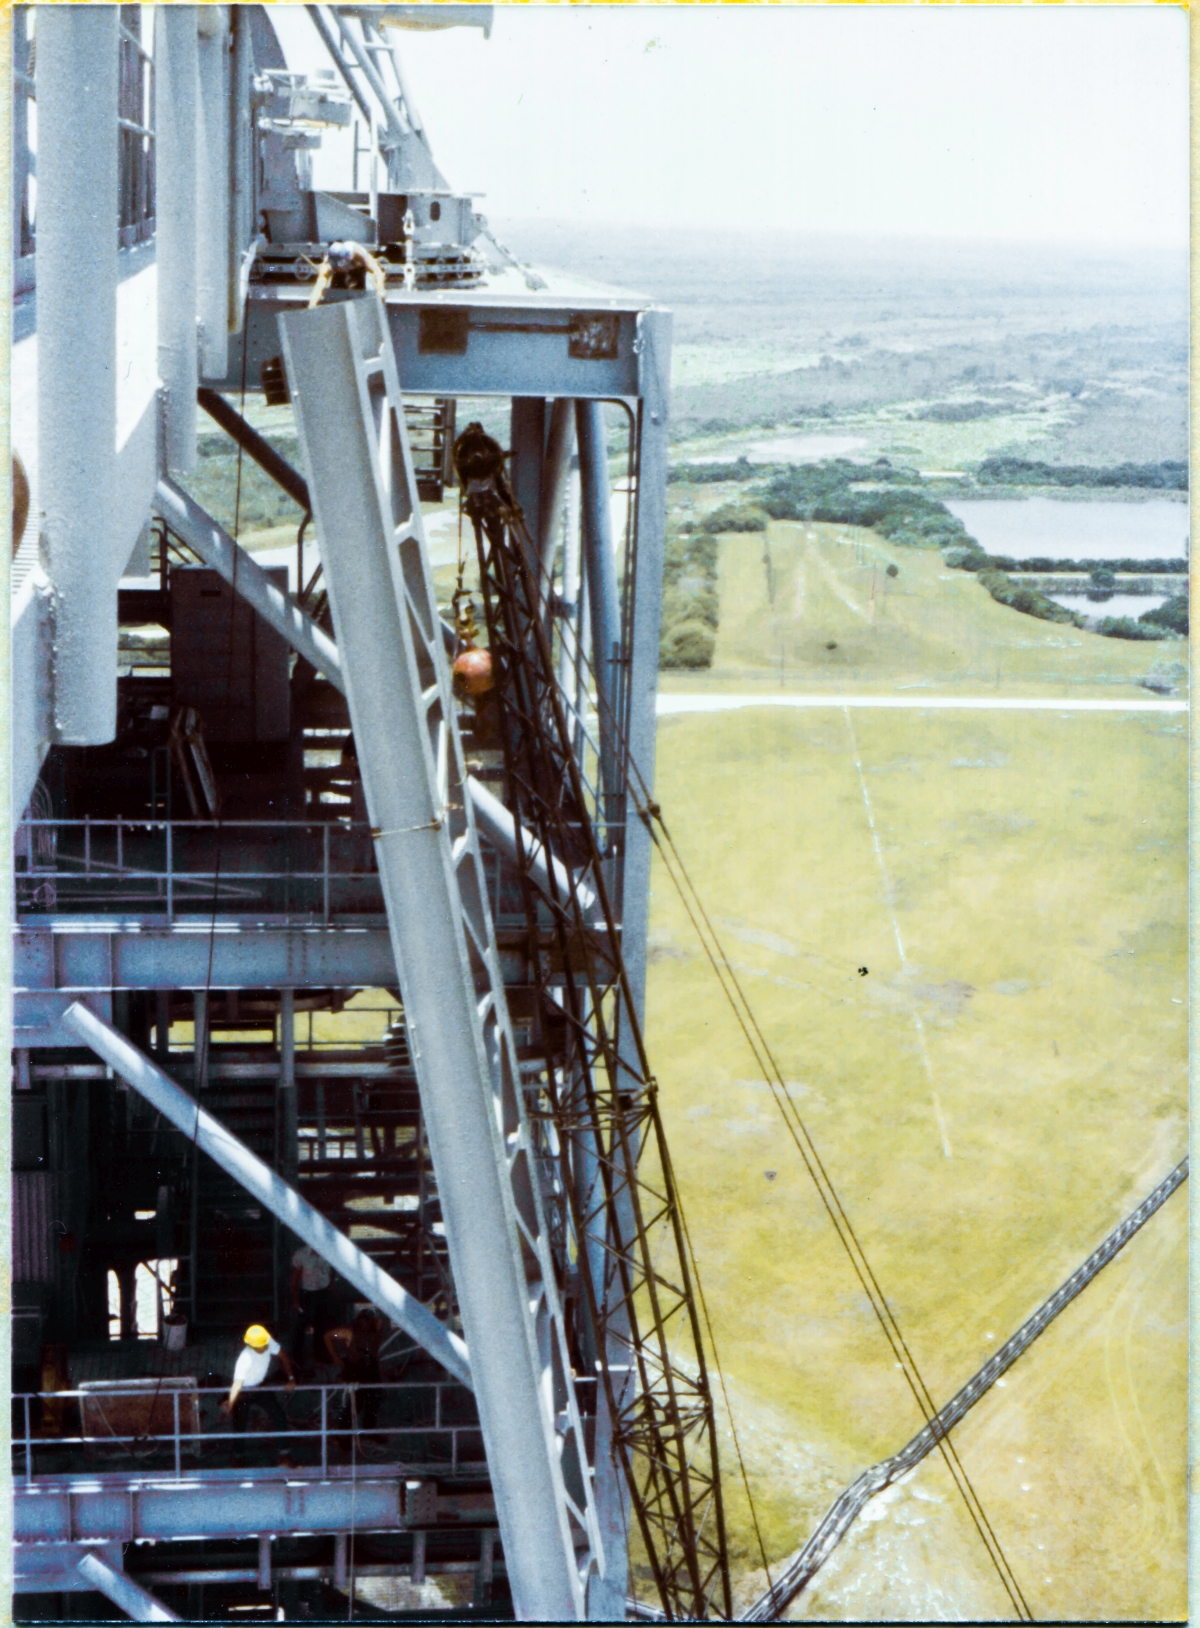 Image 082. Leaning dangerously out over empty space from a kneeling position at Elevation 300'-0”, unharnessed, untethered, Union Ironworker James Dixon barehands the top of the GOX Arm Hinges Support Strongback where it meets the top of the Fixed Service Structure at Space Shuttle Launch Complex 39-B, Kennedy Space Center, Florida, as another, unknown alas, Union Ironworker in a white shirt wearing a yellow hardhat, two levels below at Elevation 260'-0”, gives hand signals to the crane operator, at the controls in his cab, down on the Pad Deck at Elevation 53'-0”. The crane operator has no way to see what's going on far above him with any kind of detail, and relies exclusively on the hand signals he's being given, even as everyone else relies on his skill at swinging, rotating, and nudging forty feet of steel truss weighing well over 10,000 pounds into a final position that has to wind up within roughly one sixteenth of an inch of where it's needed for final attachment to the FSS. Everyone's lives hang in the balance as this work is done, they all know this, and they all trust one another. With their own lives. As they do the work. Photo by James MacLaren.